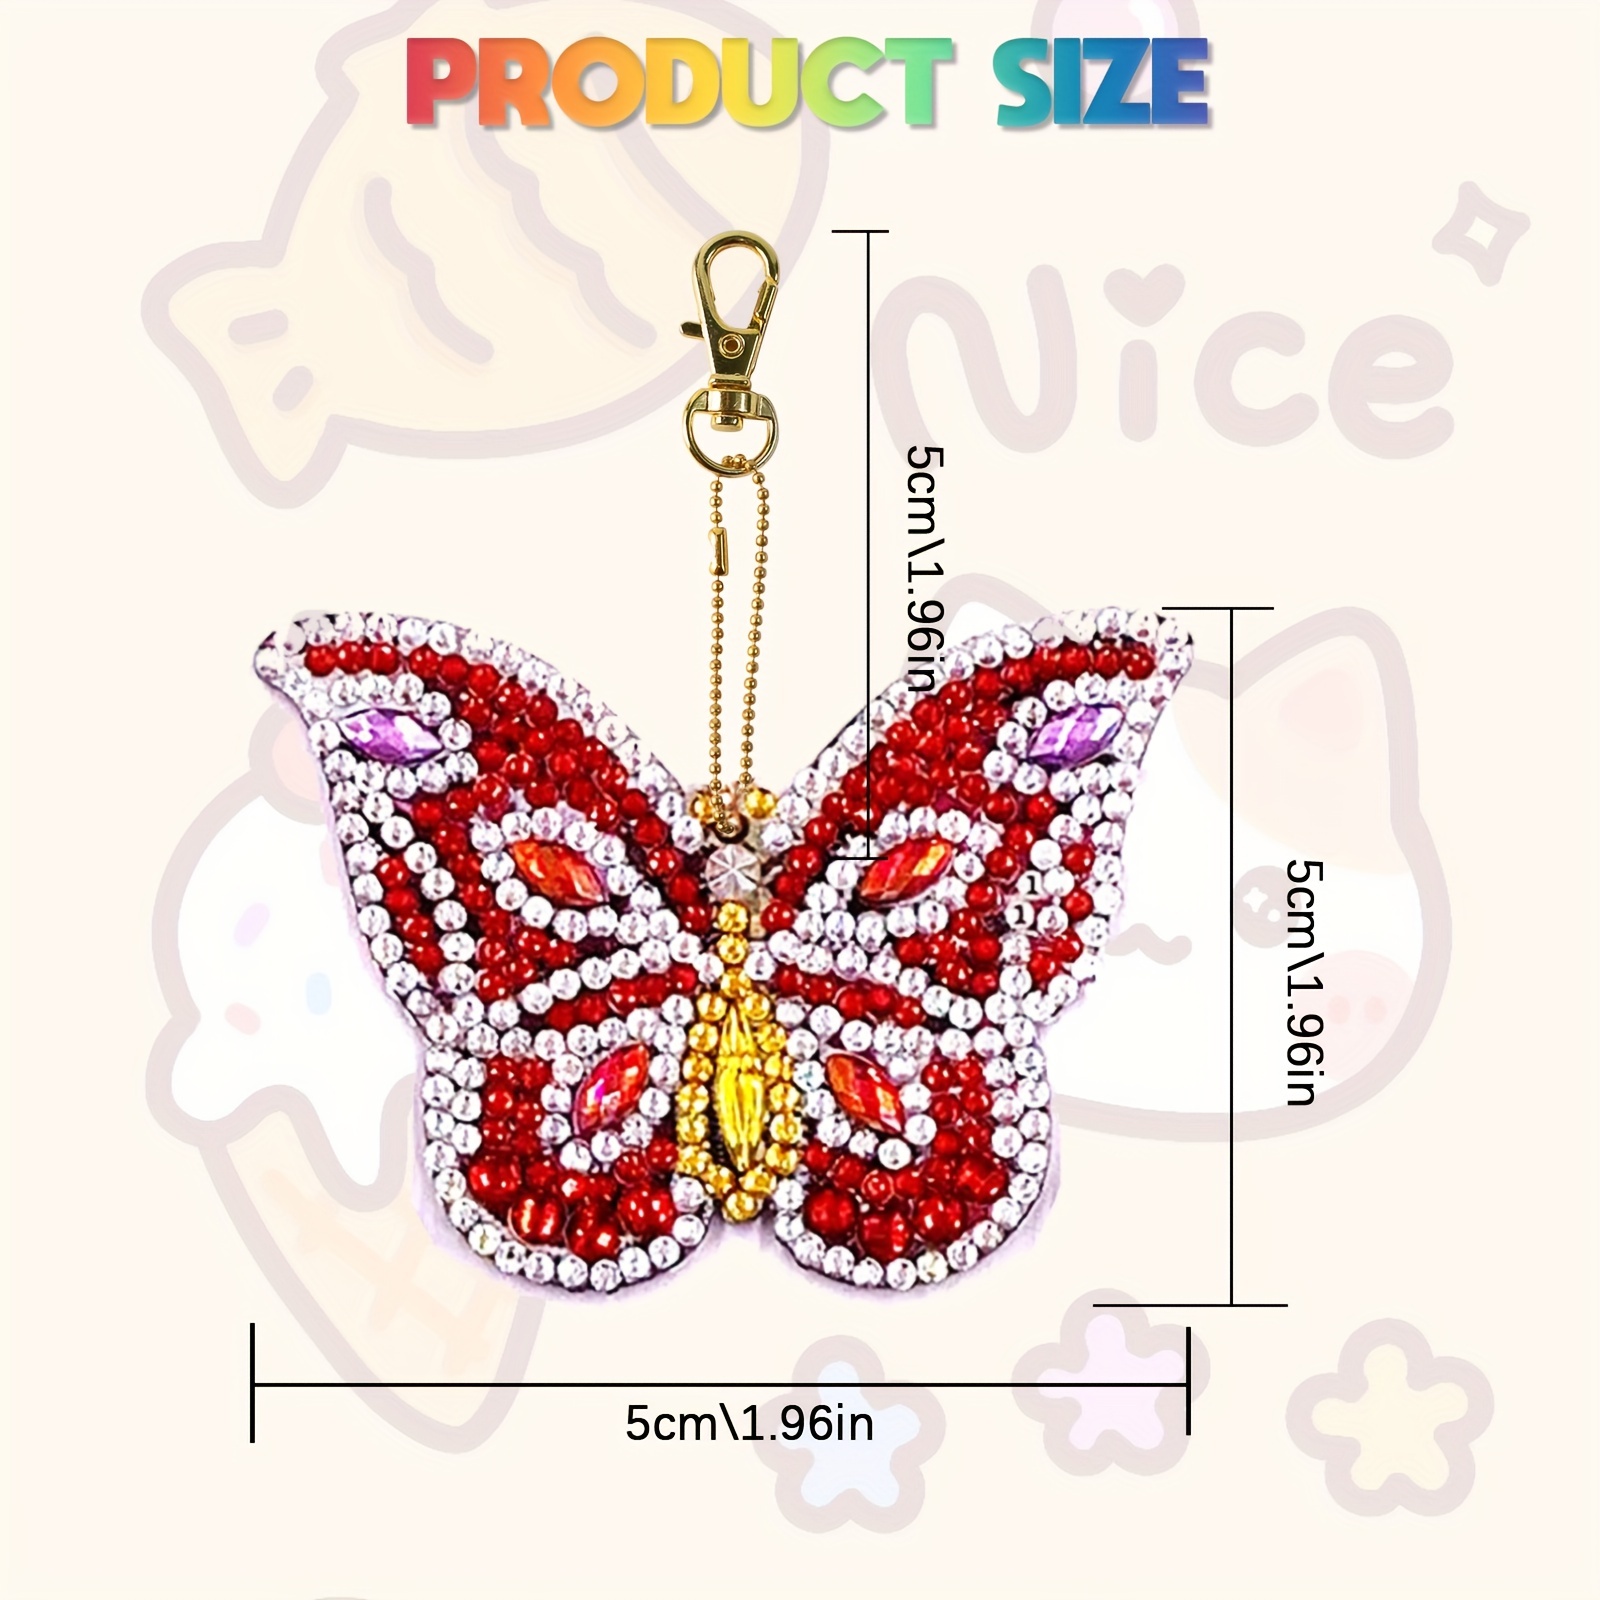  12 Pcs Butterfly Diamond Painting Keychains Summer Diamond Key  Chains Kit DIY Butterflies Diamond Art Keychains for Beginners Kids Adults  DIY Key Ring Pendant Summer Crafts Making (Butterfly Style)